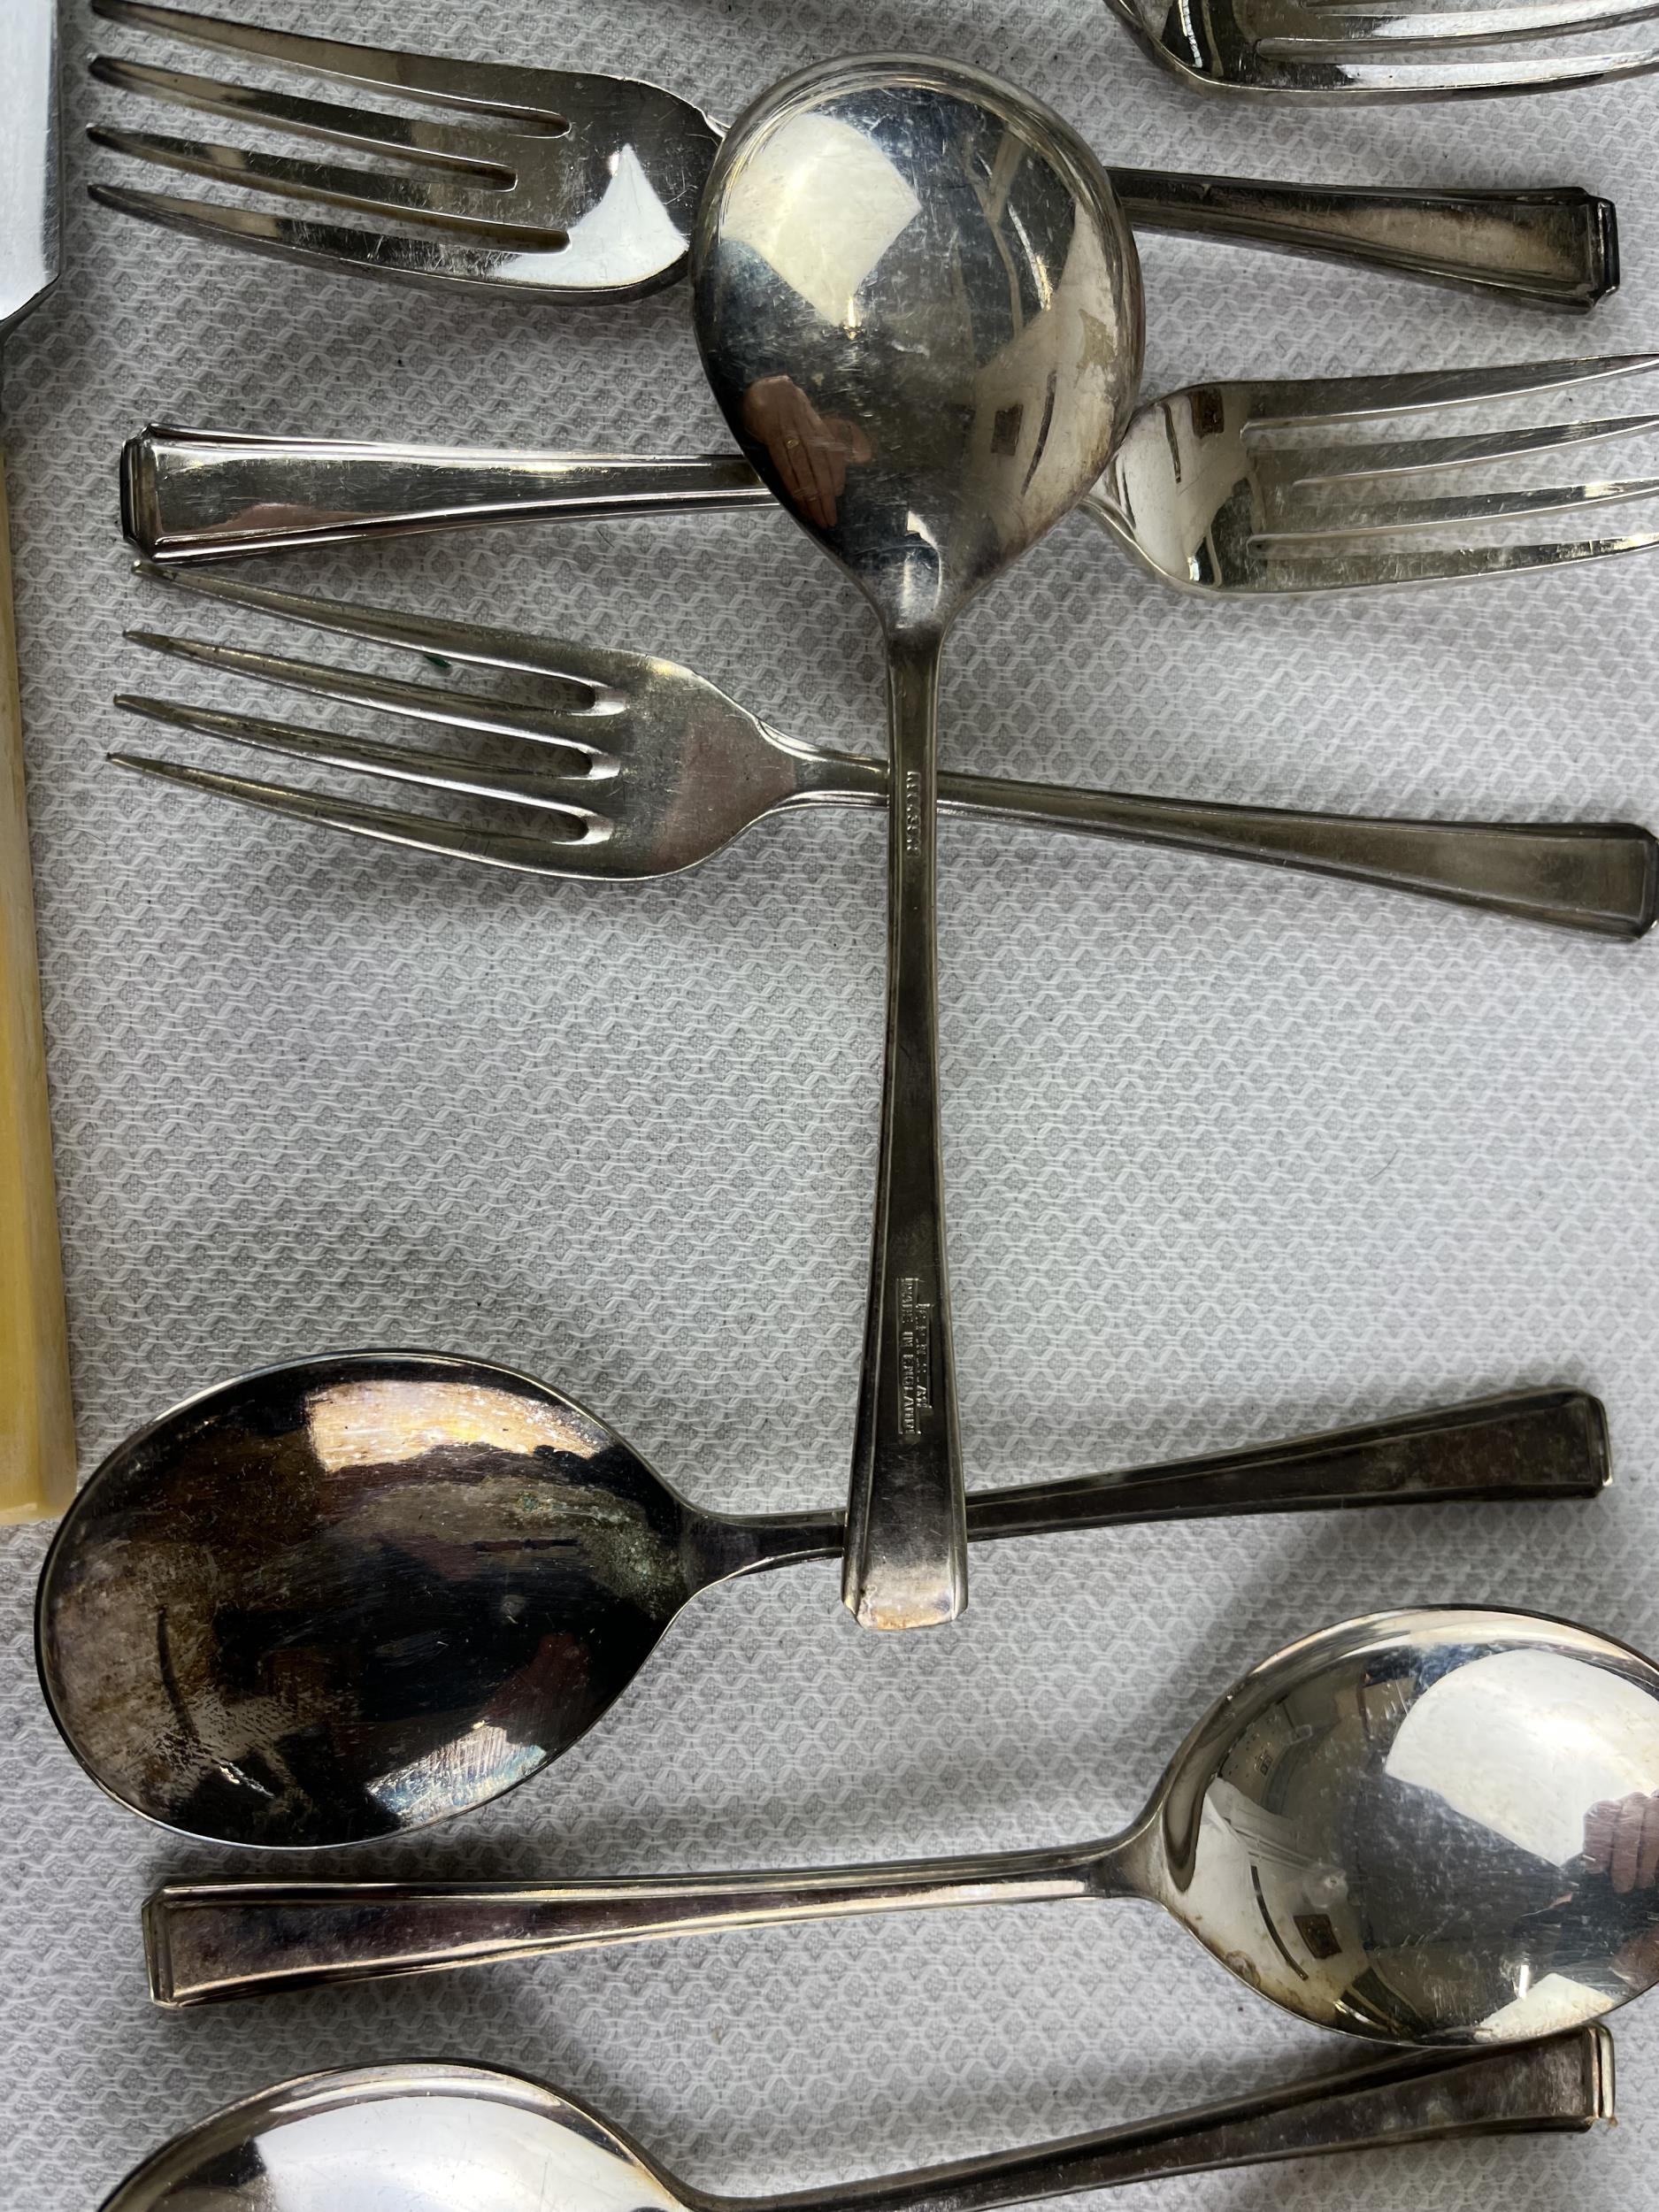 An extensive set of silver plated cutlery along with bone handled knives. - Image 3 of 6